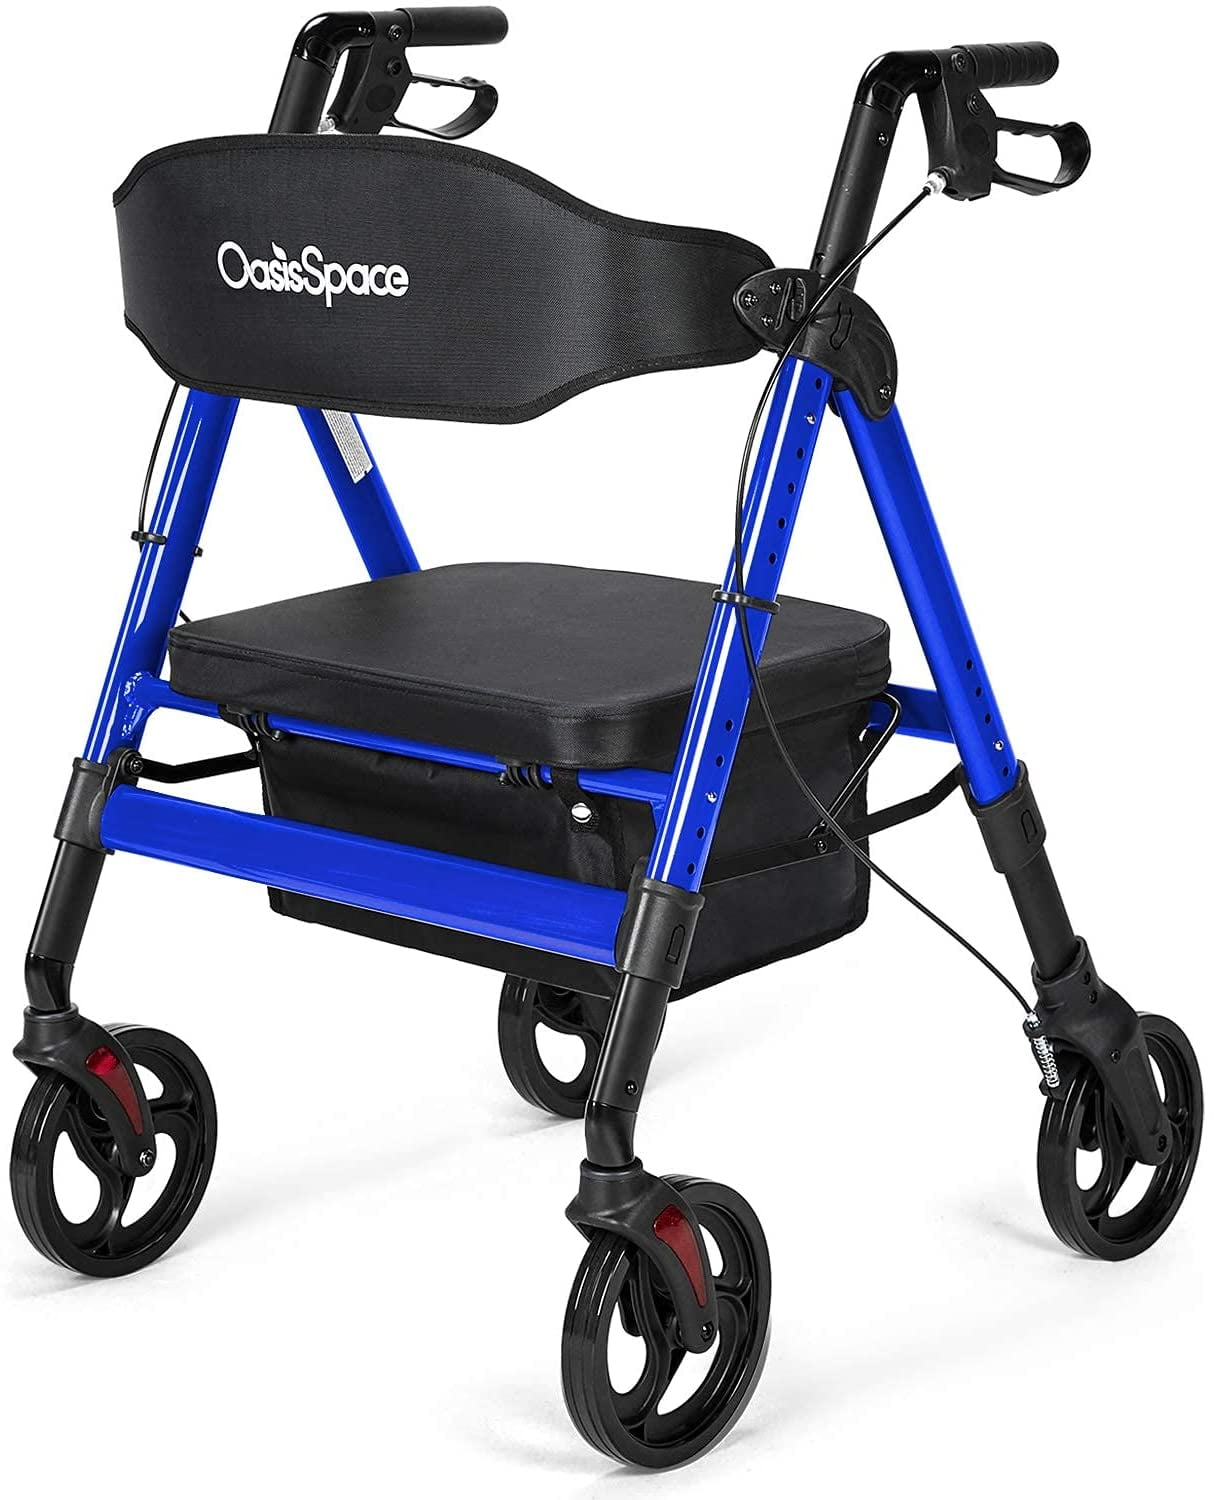 OasisSpace Duty Rollator Walker - Bariatric Rollator Walker with Large Seat for Seniors Support up 500 lbs (Blue) - Walmart.com